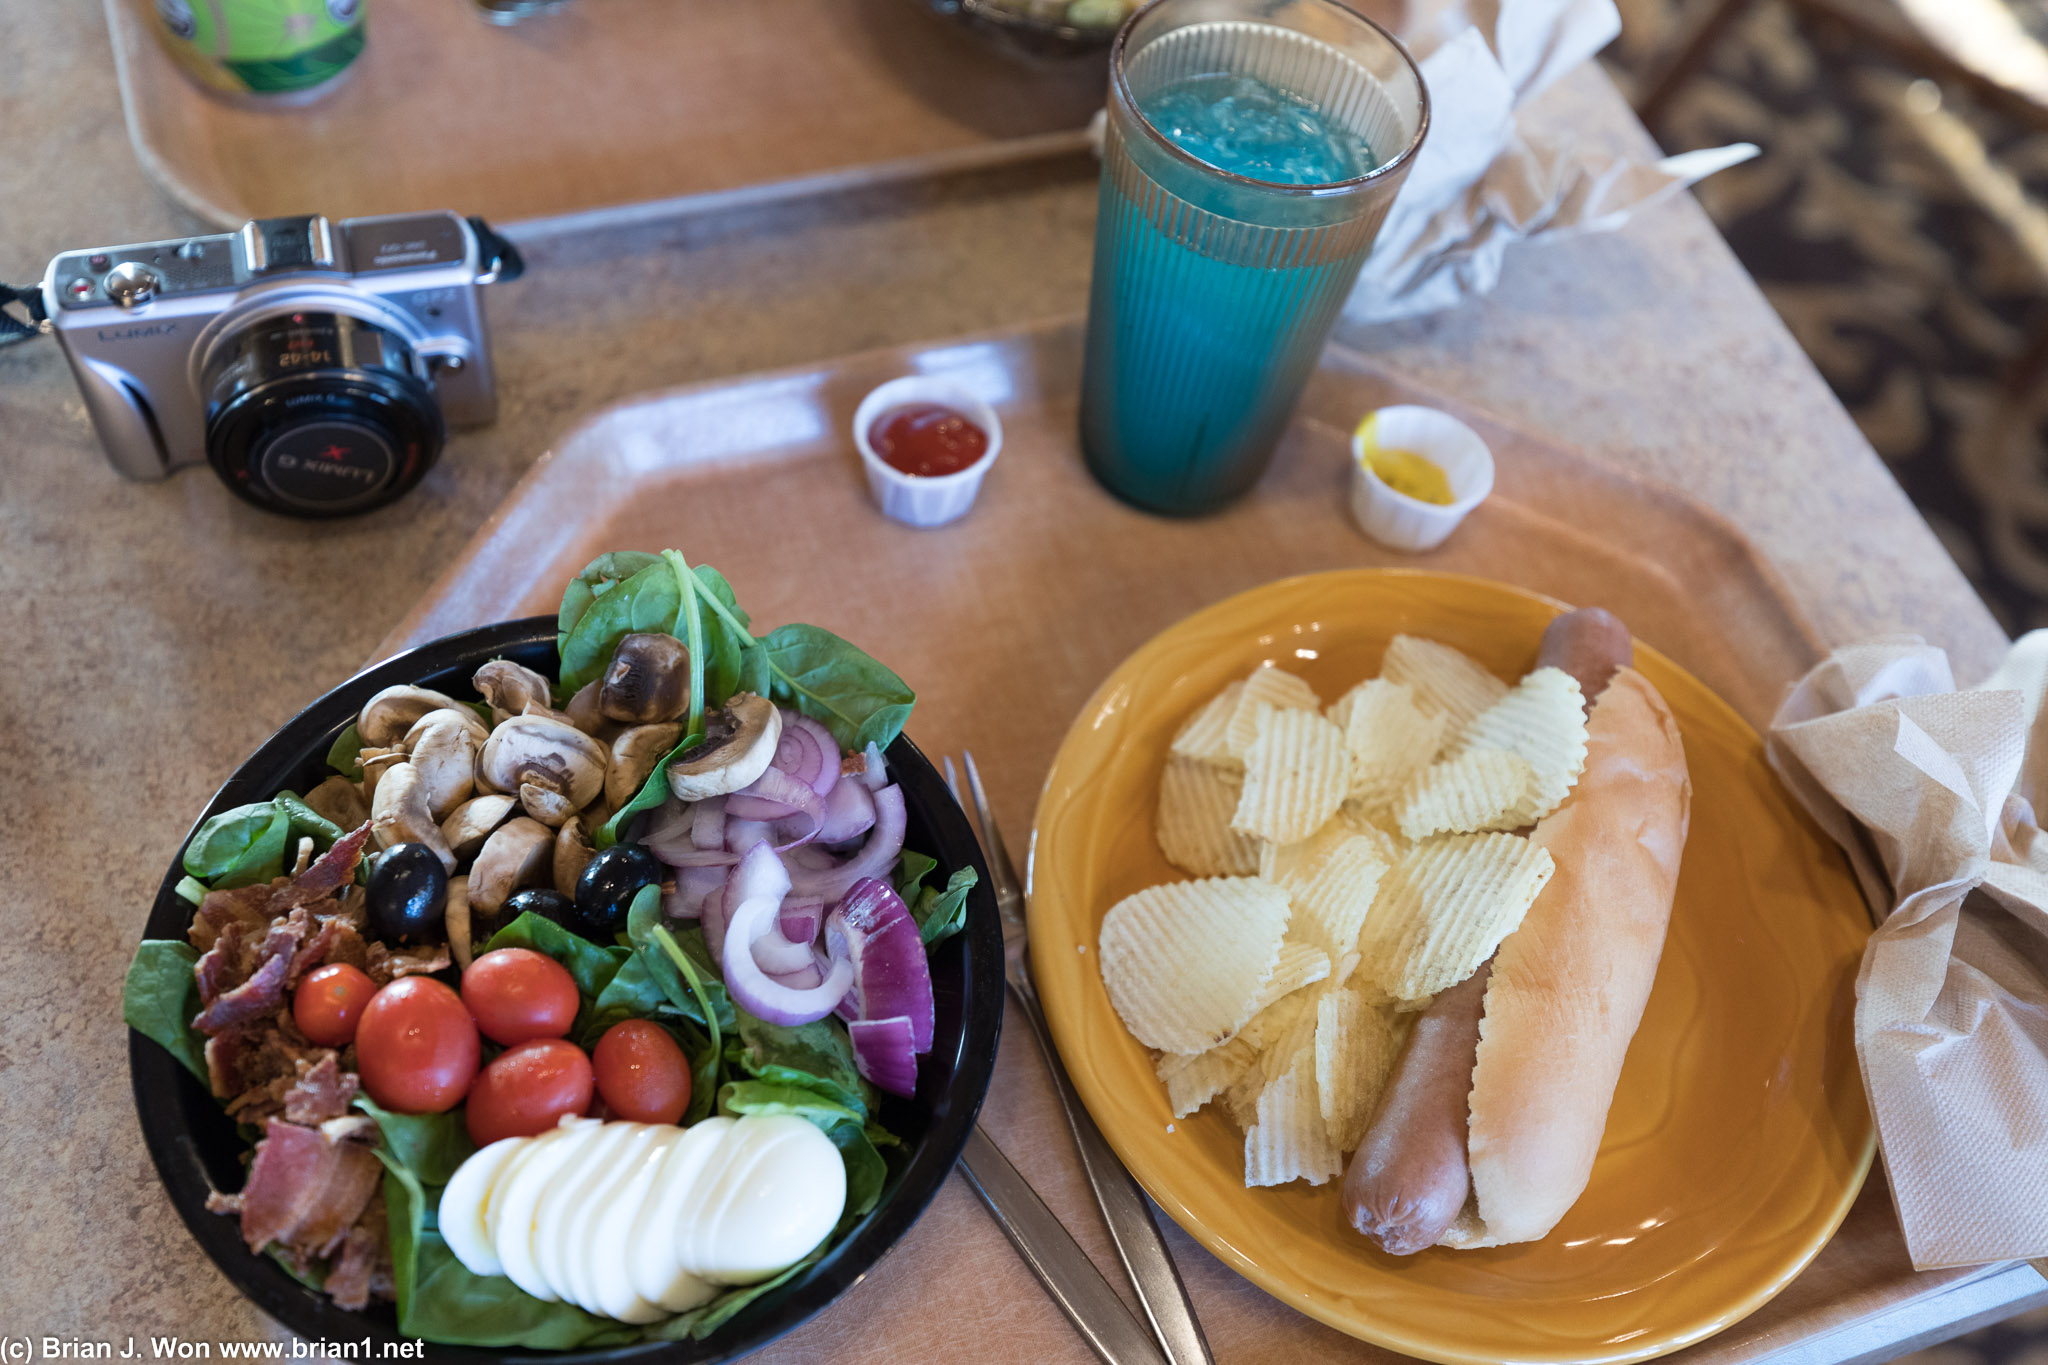 Travel through Middle America: indifferent cafeteria food and a camera.